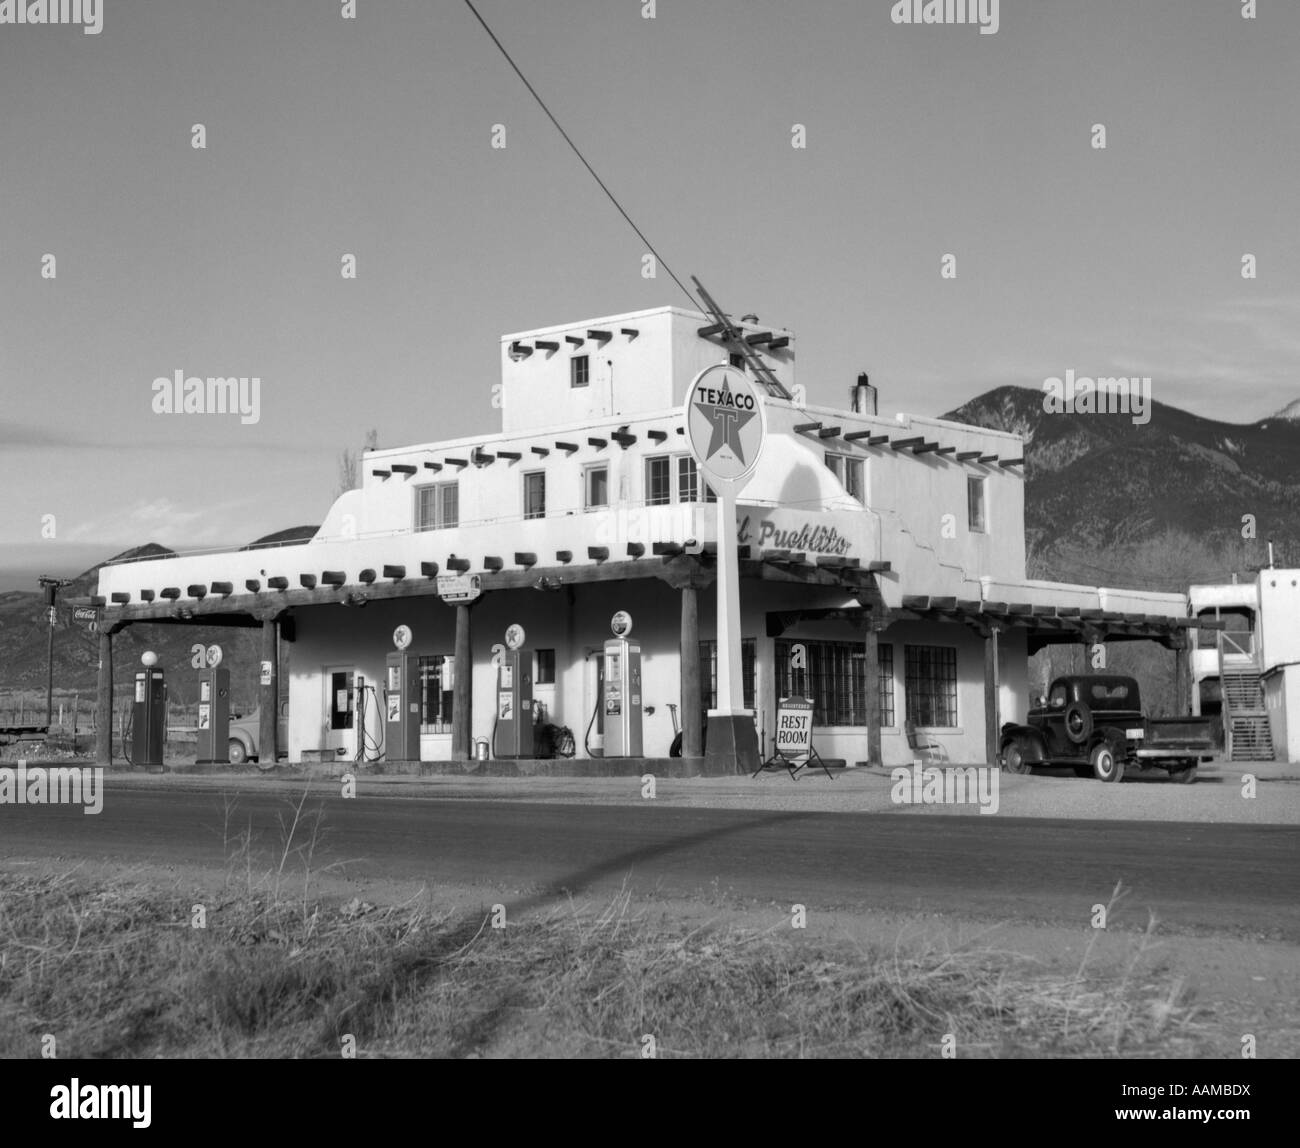 1950s TEXACO GAS STATION NEW MEXICO OLD FASHIONED GAS PUMPS ADOBE STYLE ARCHITECTURE Stock Photo